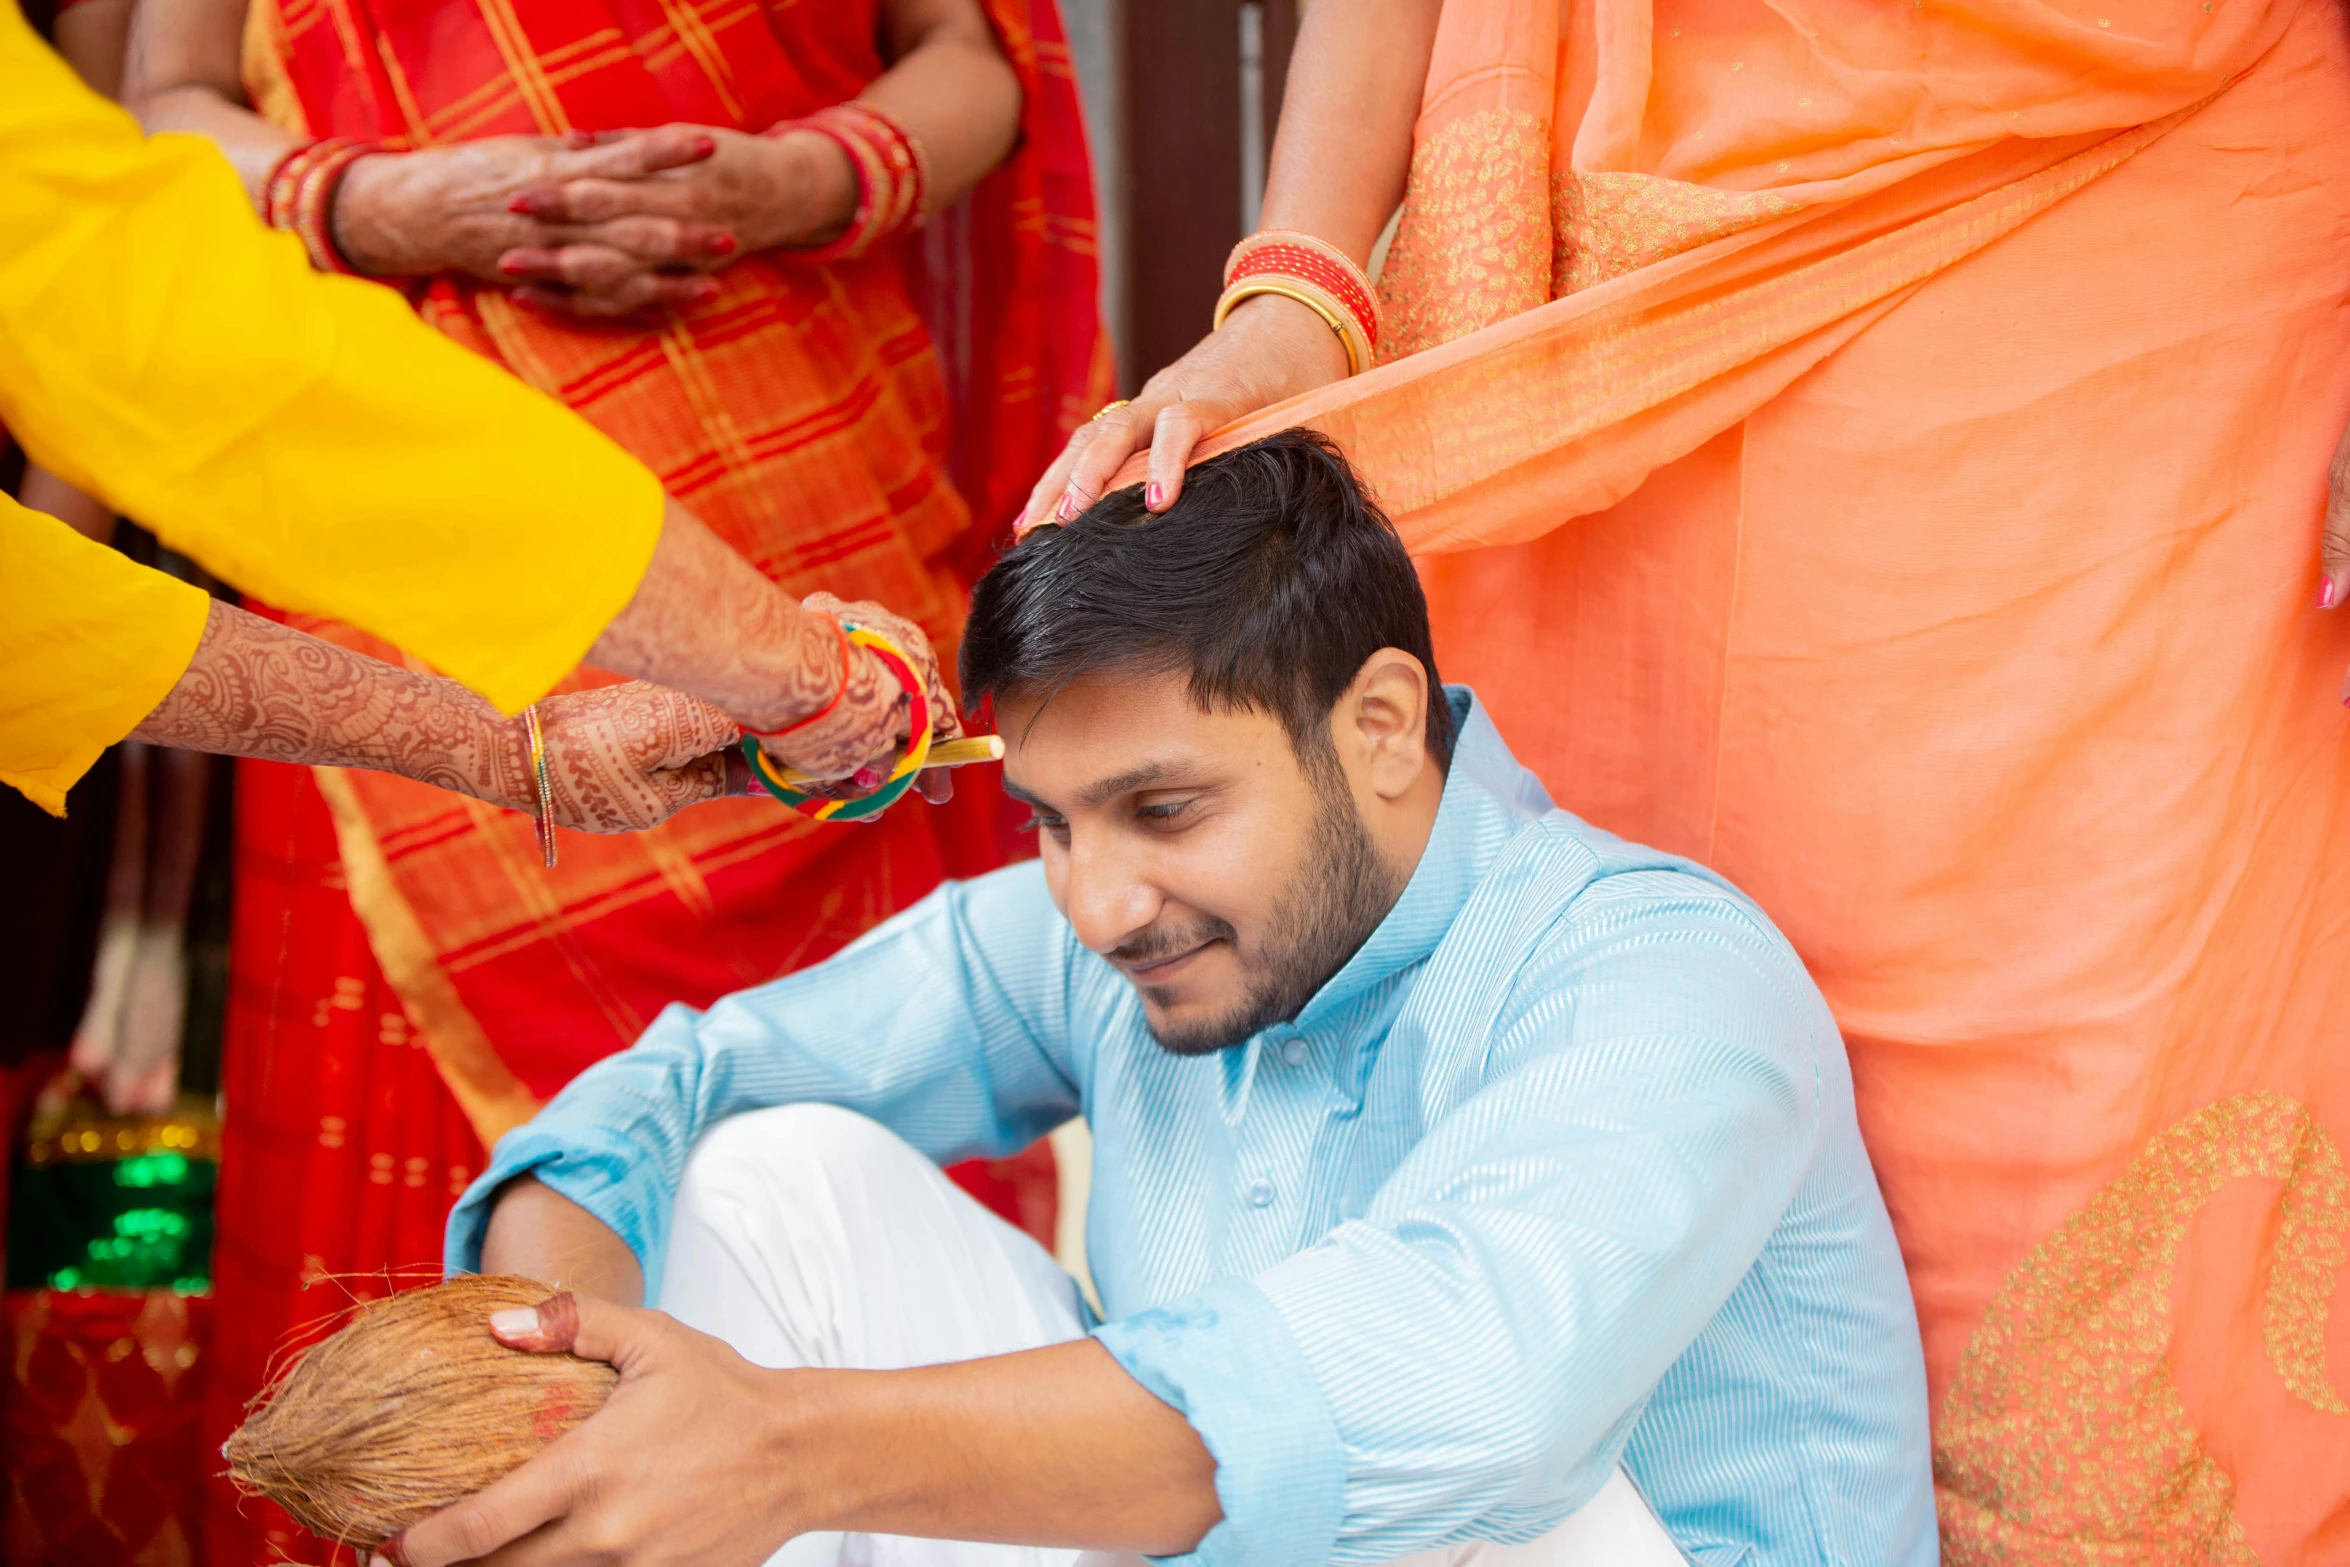 groom getting ready to cut hair with other people nearby